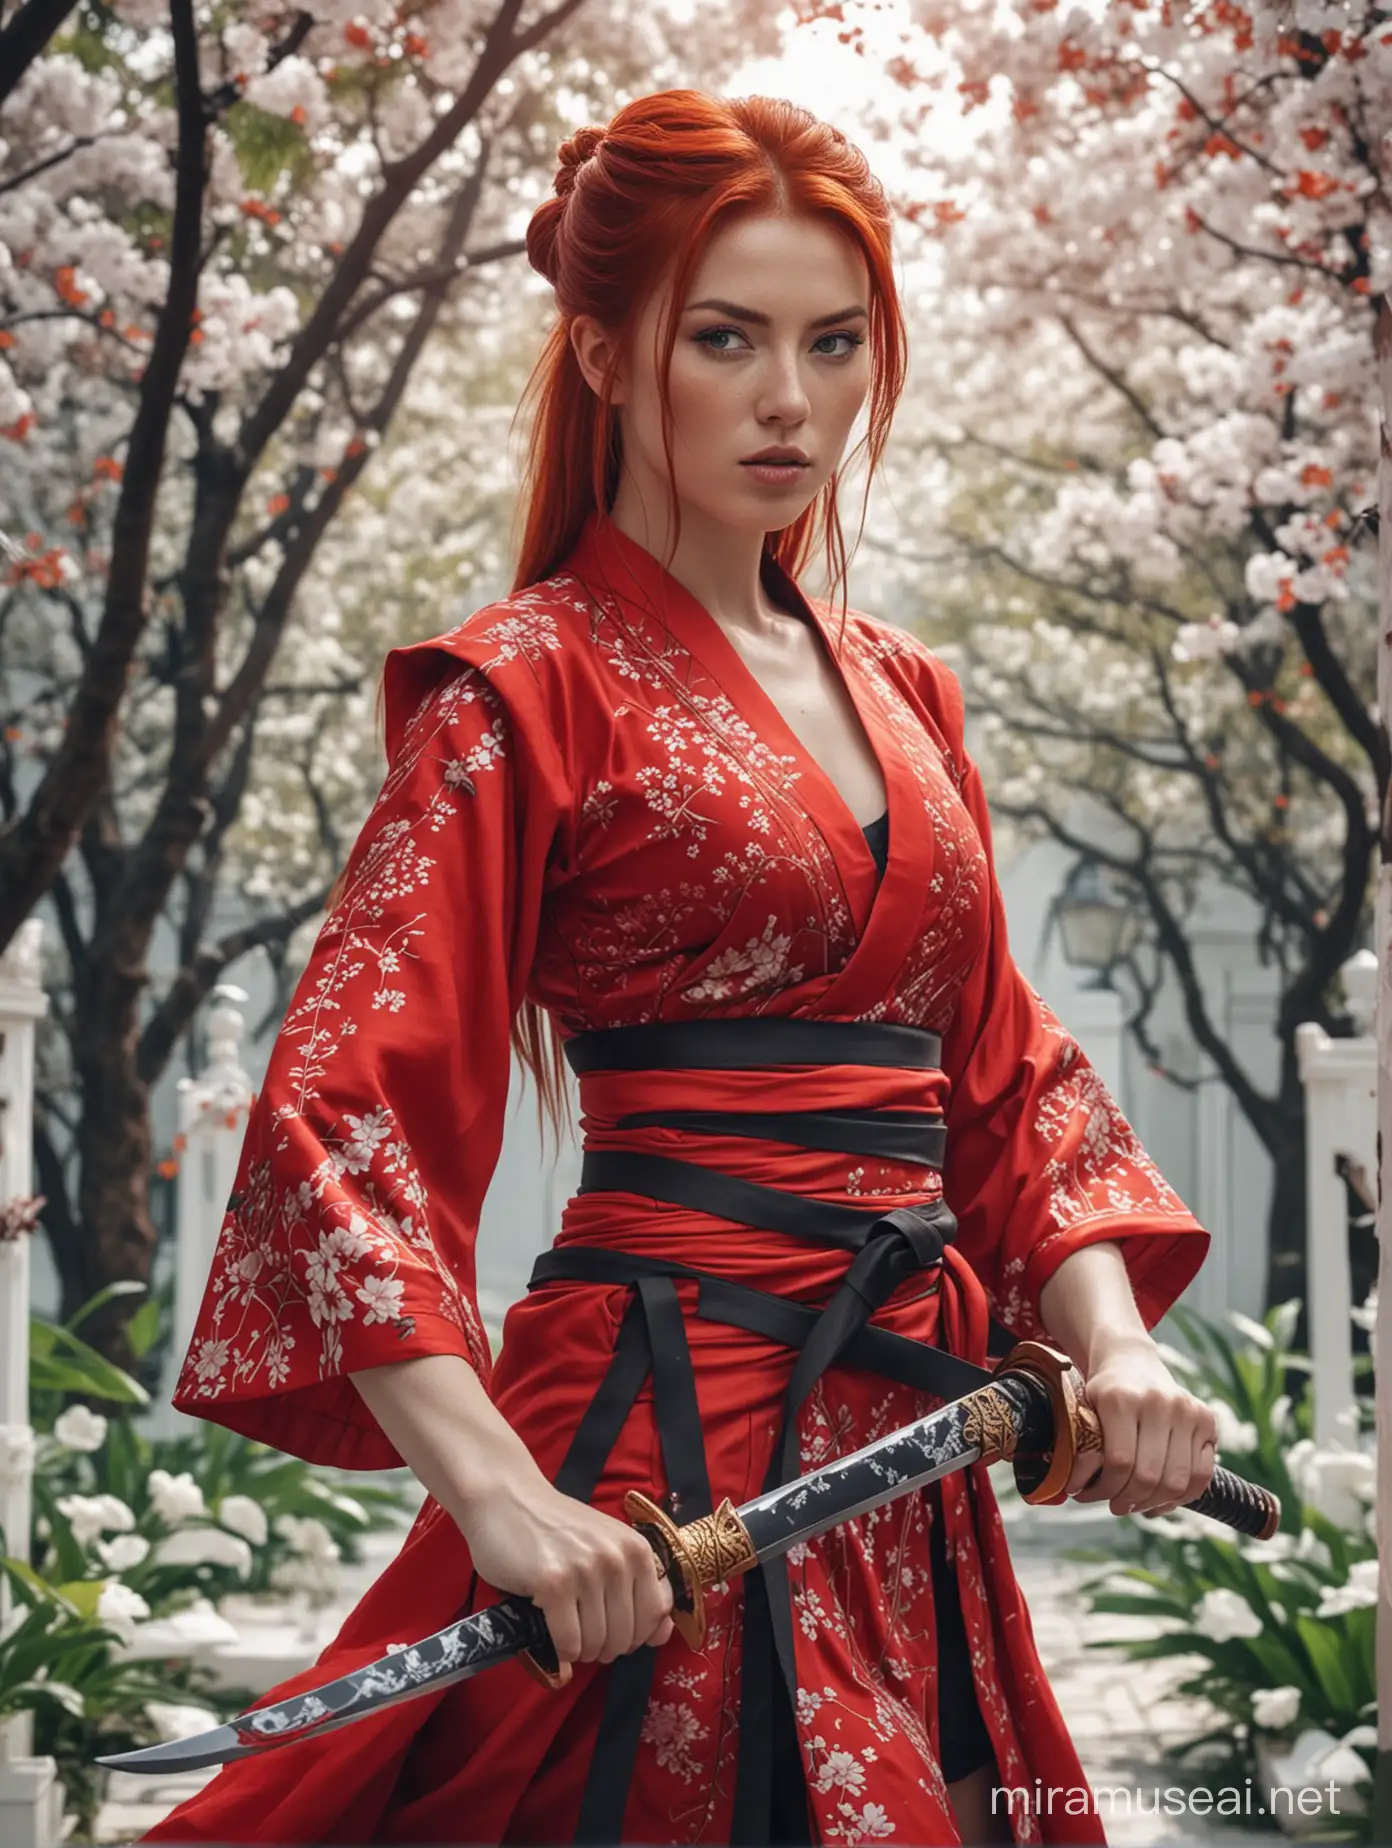 RedHaired Warrior Woman with Katana in Enchanted White Garden